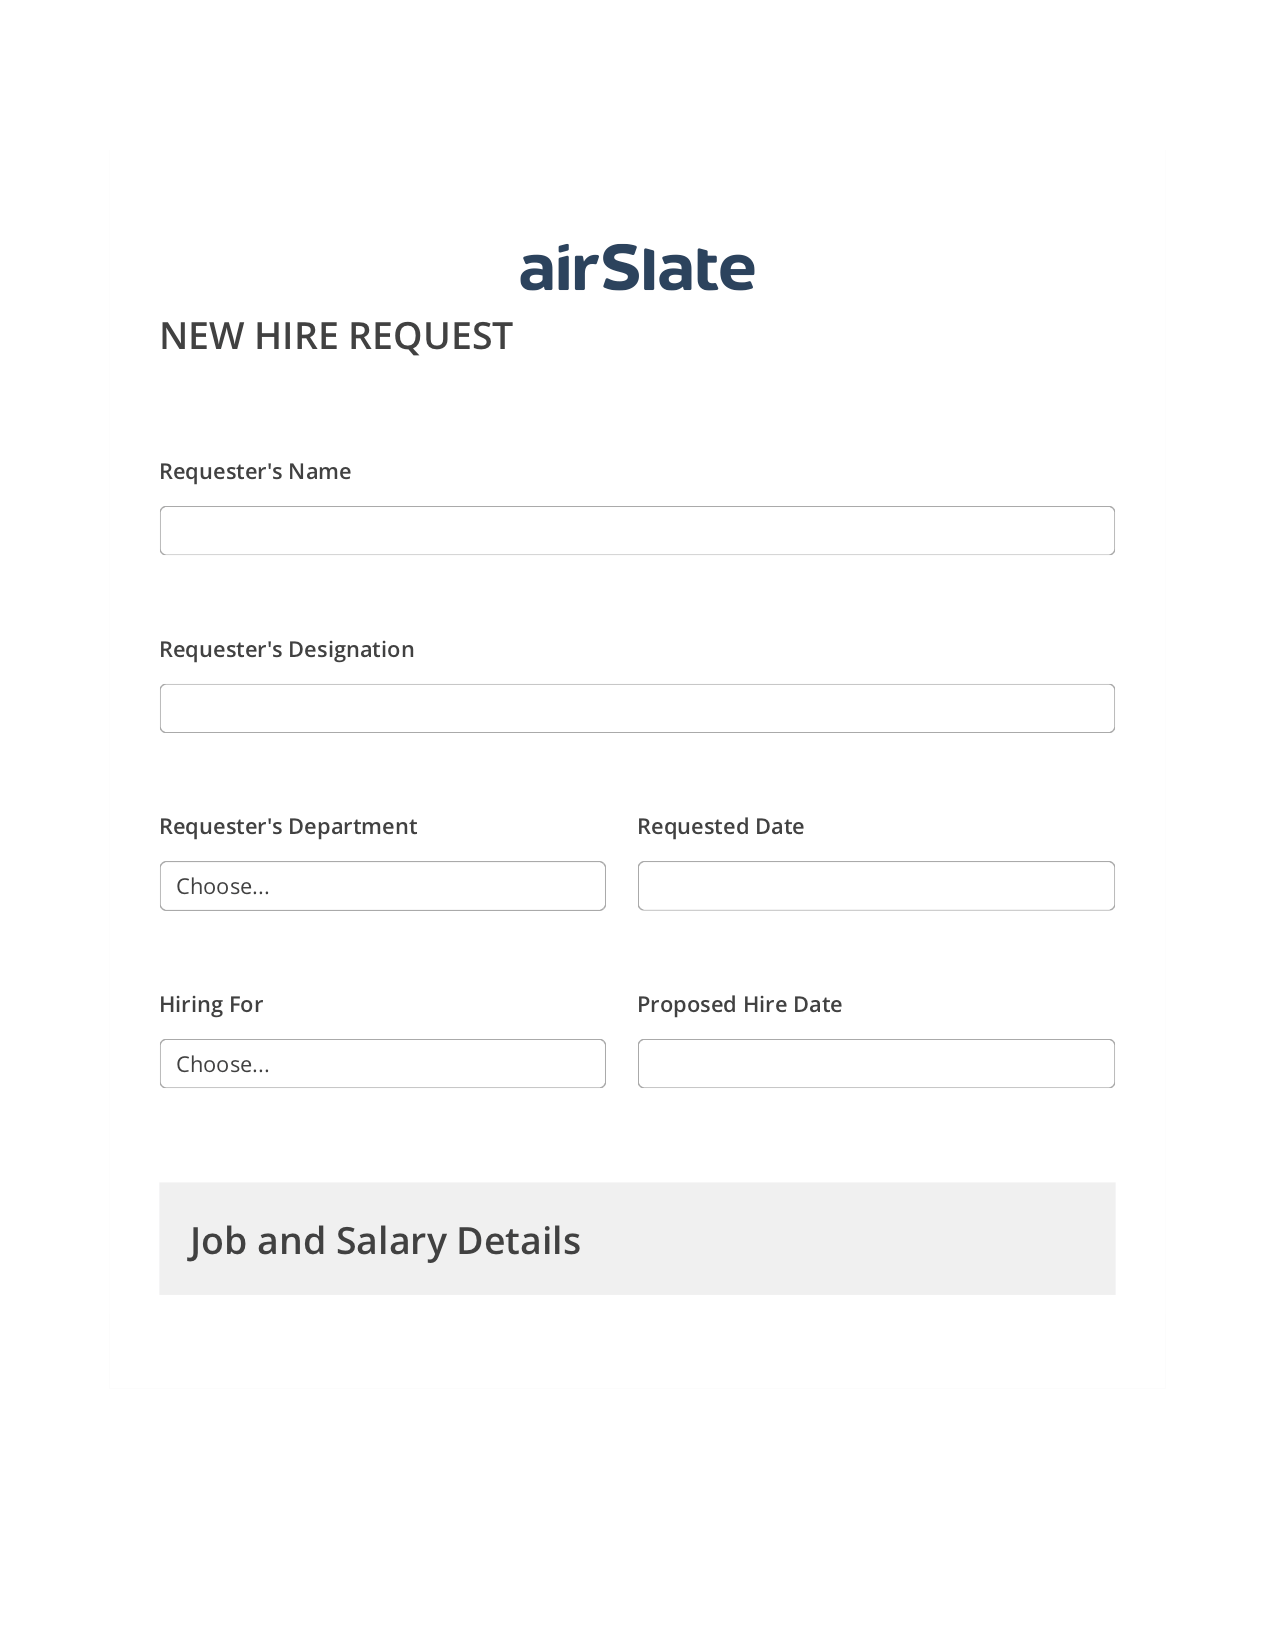 Hiring Request Workflow Pre-fill from Salesforce Records with SOQL Bot, Create slate from another Flow Bot, Archive to Dropbox Bot